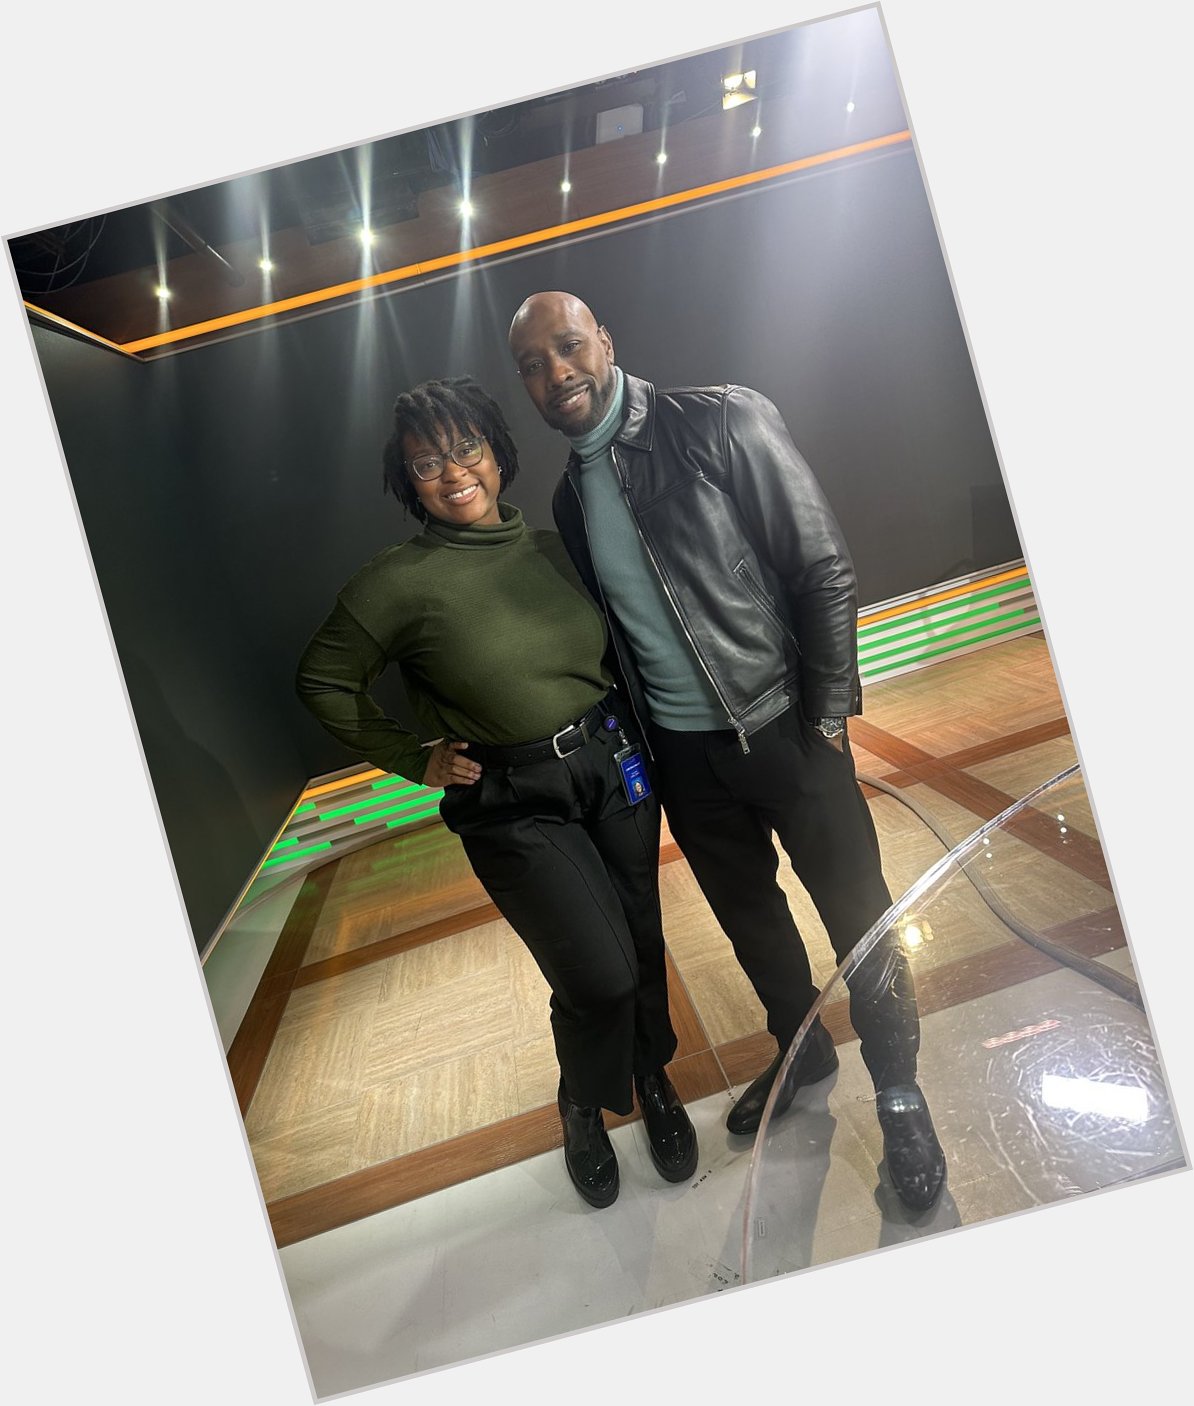 Met Morris Chestnut today onset and he even told my mom happy birthday   